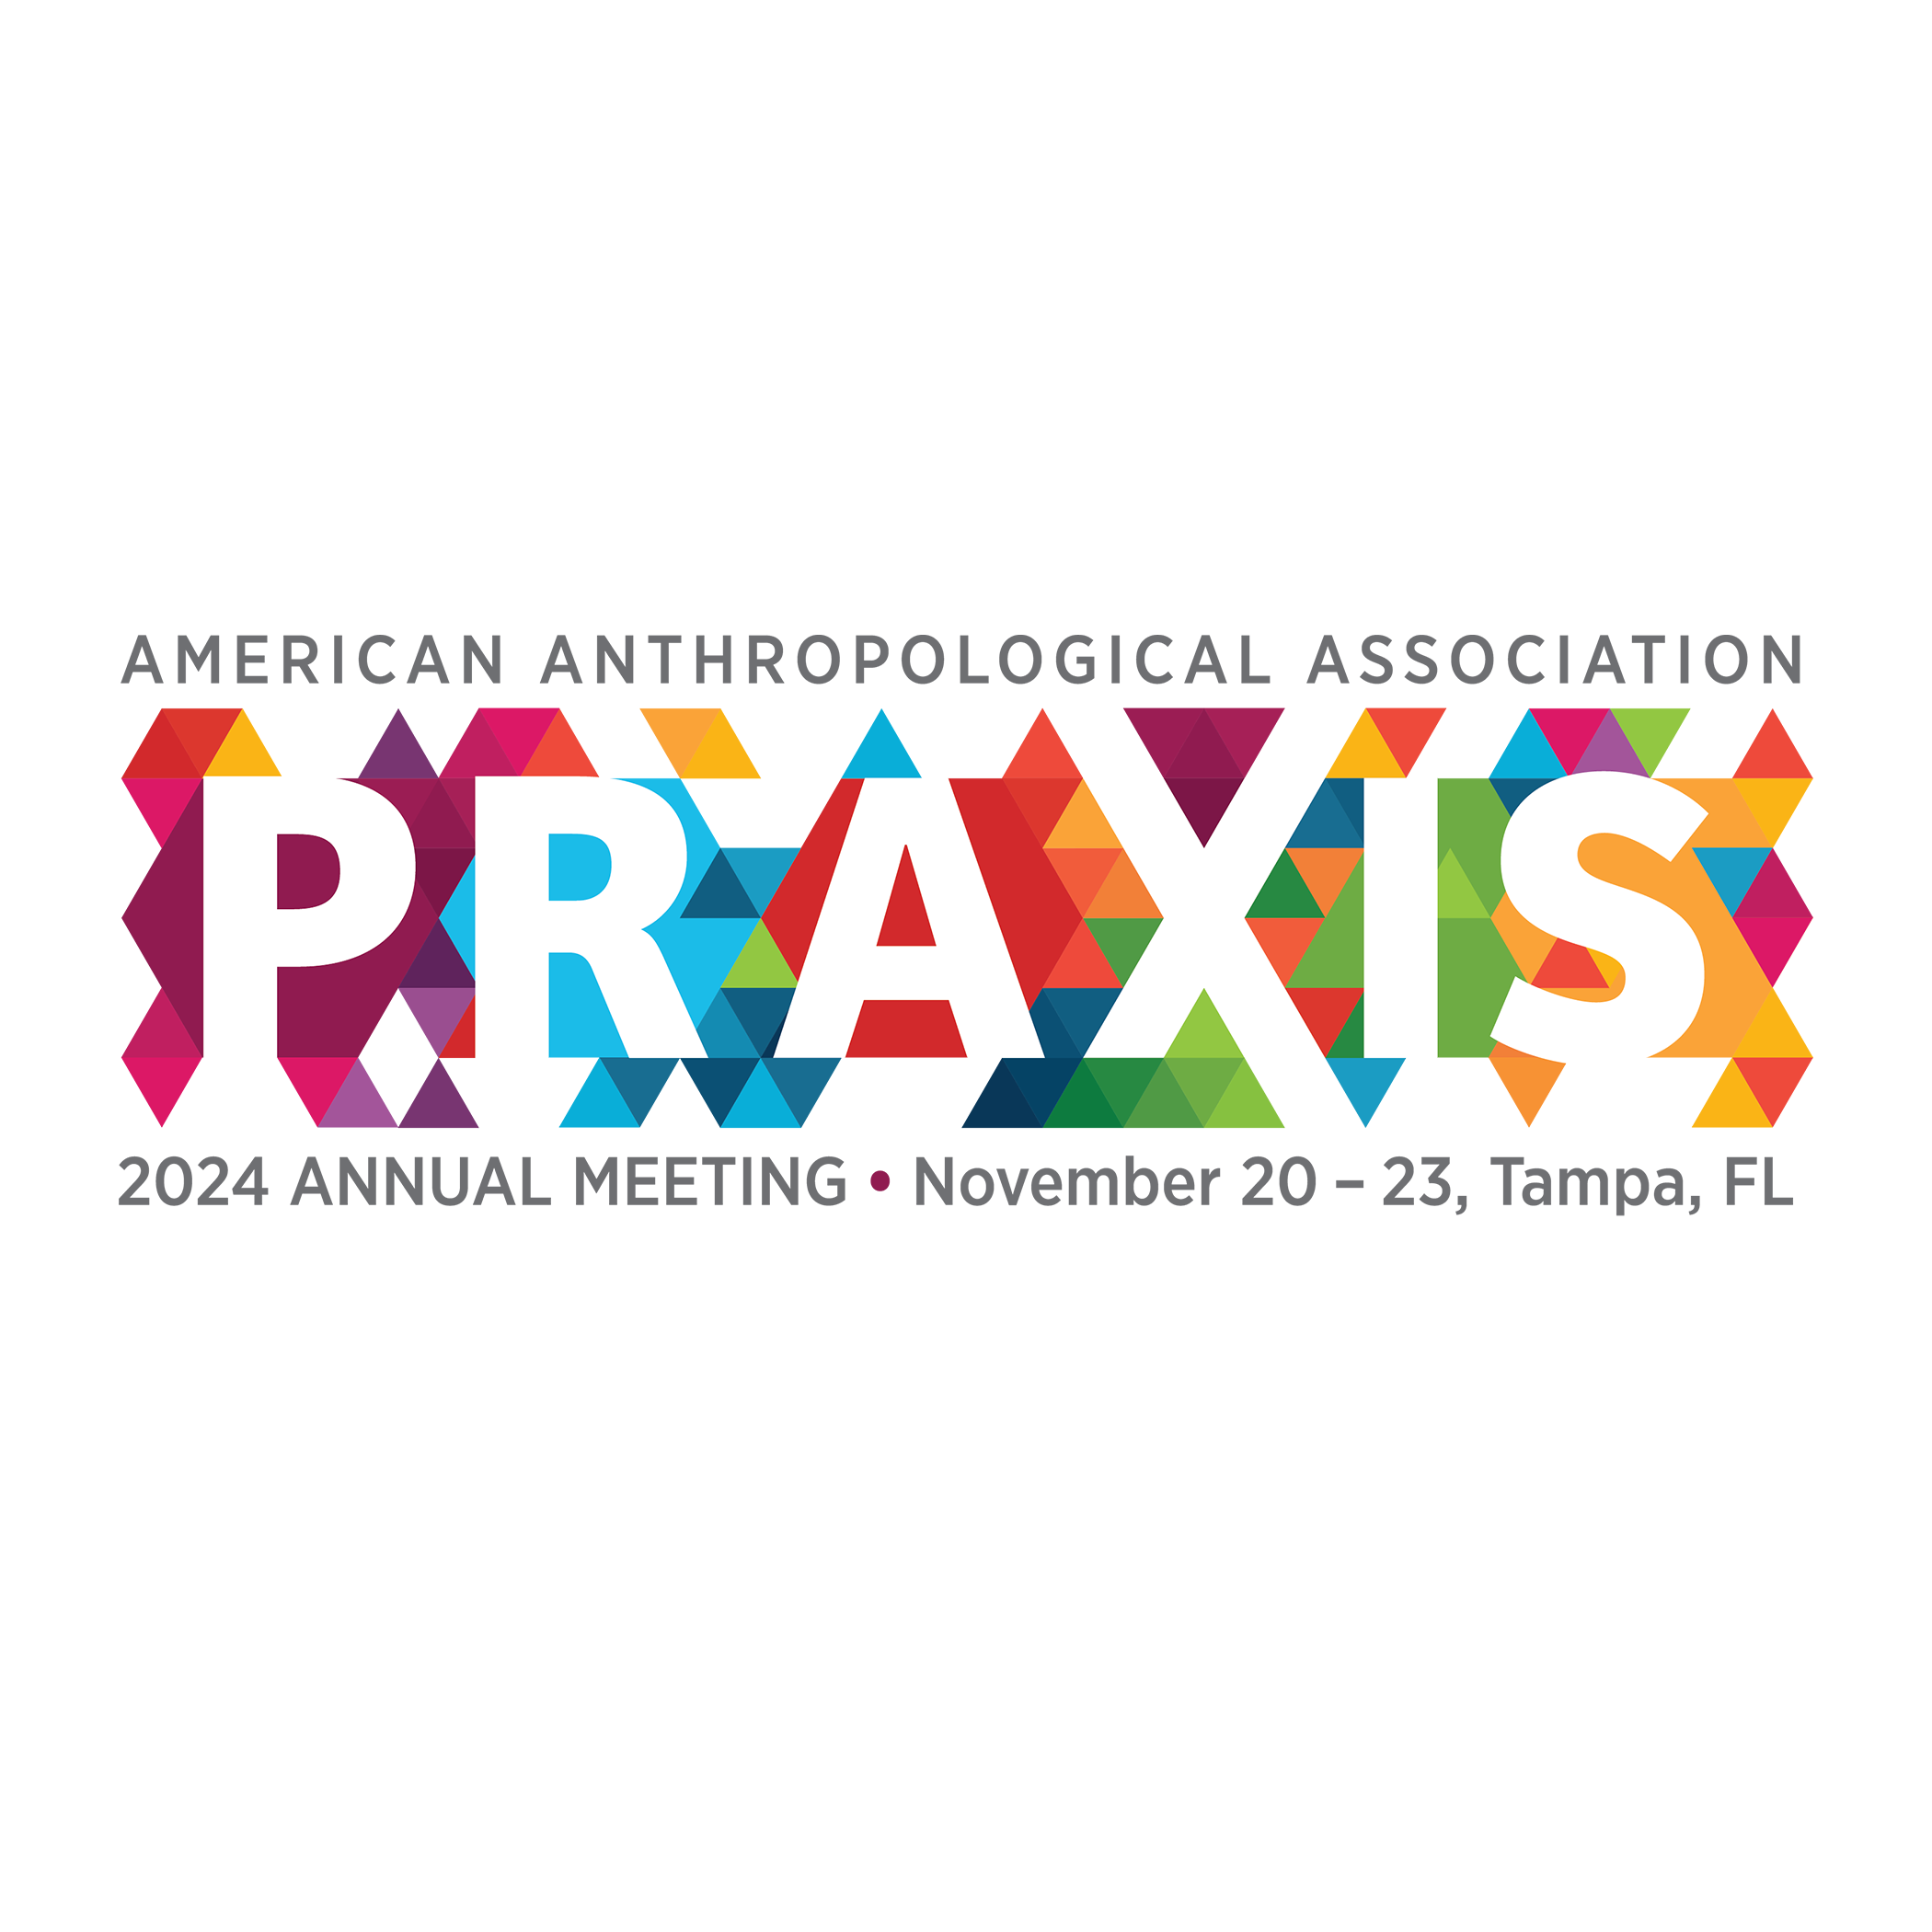 APLA Statement on the 2024 AAA Annual Meeting in Tampa